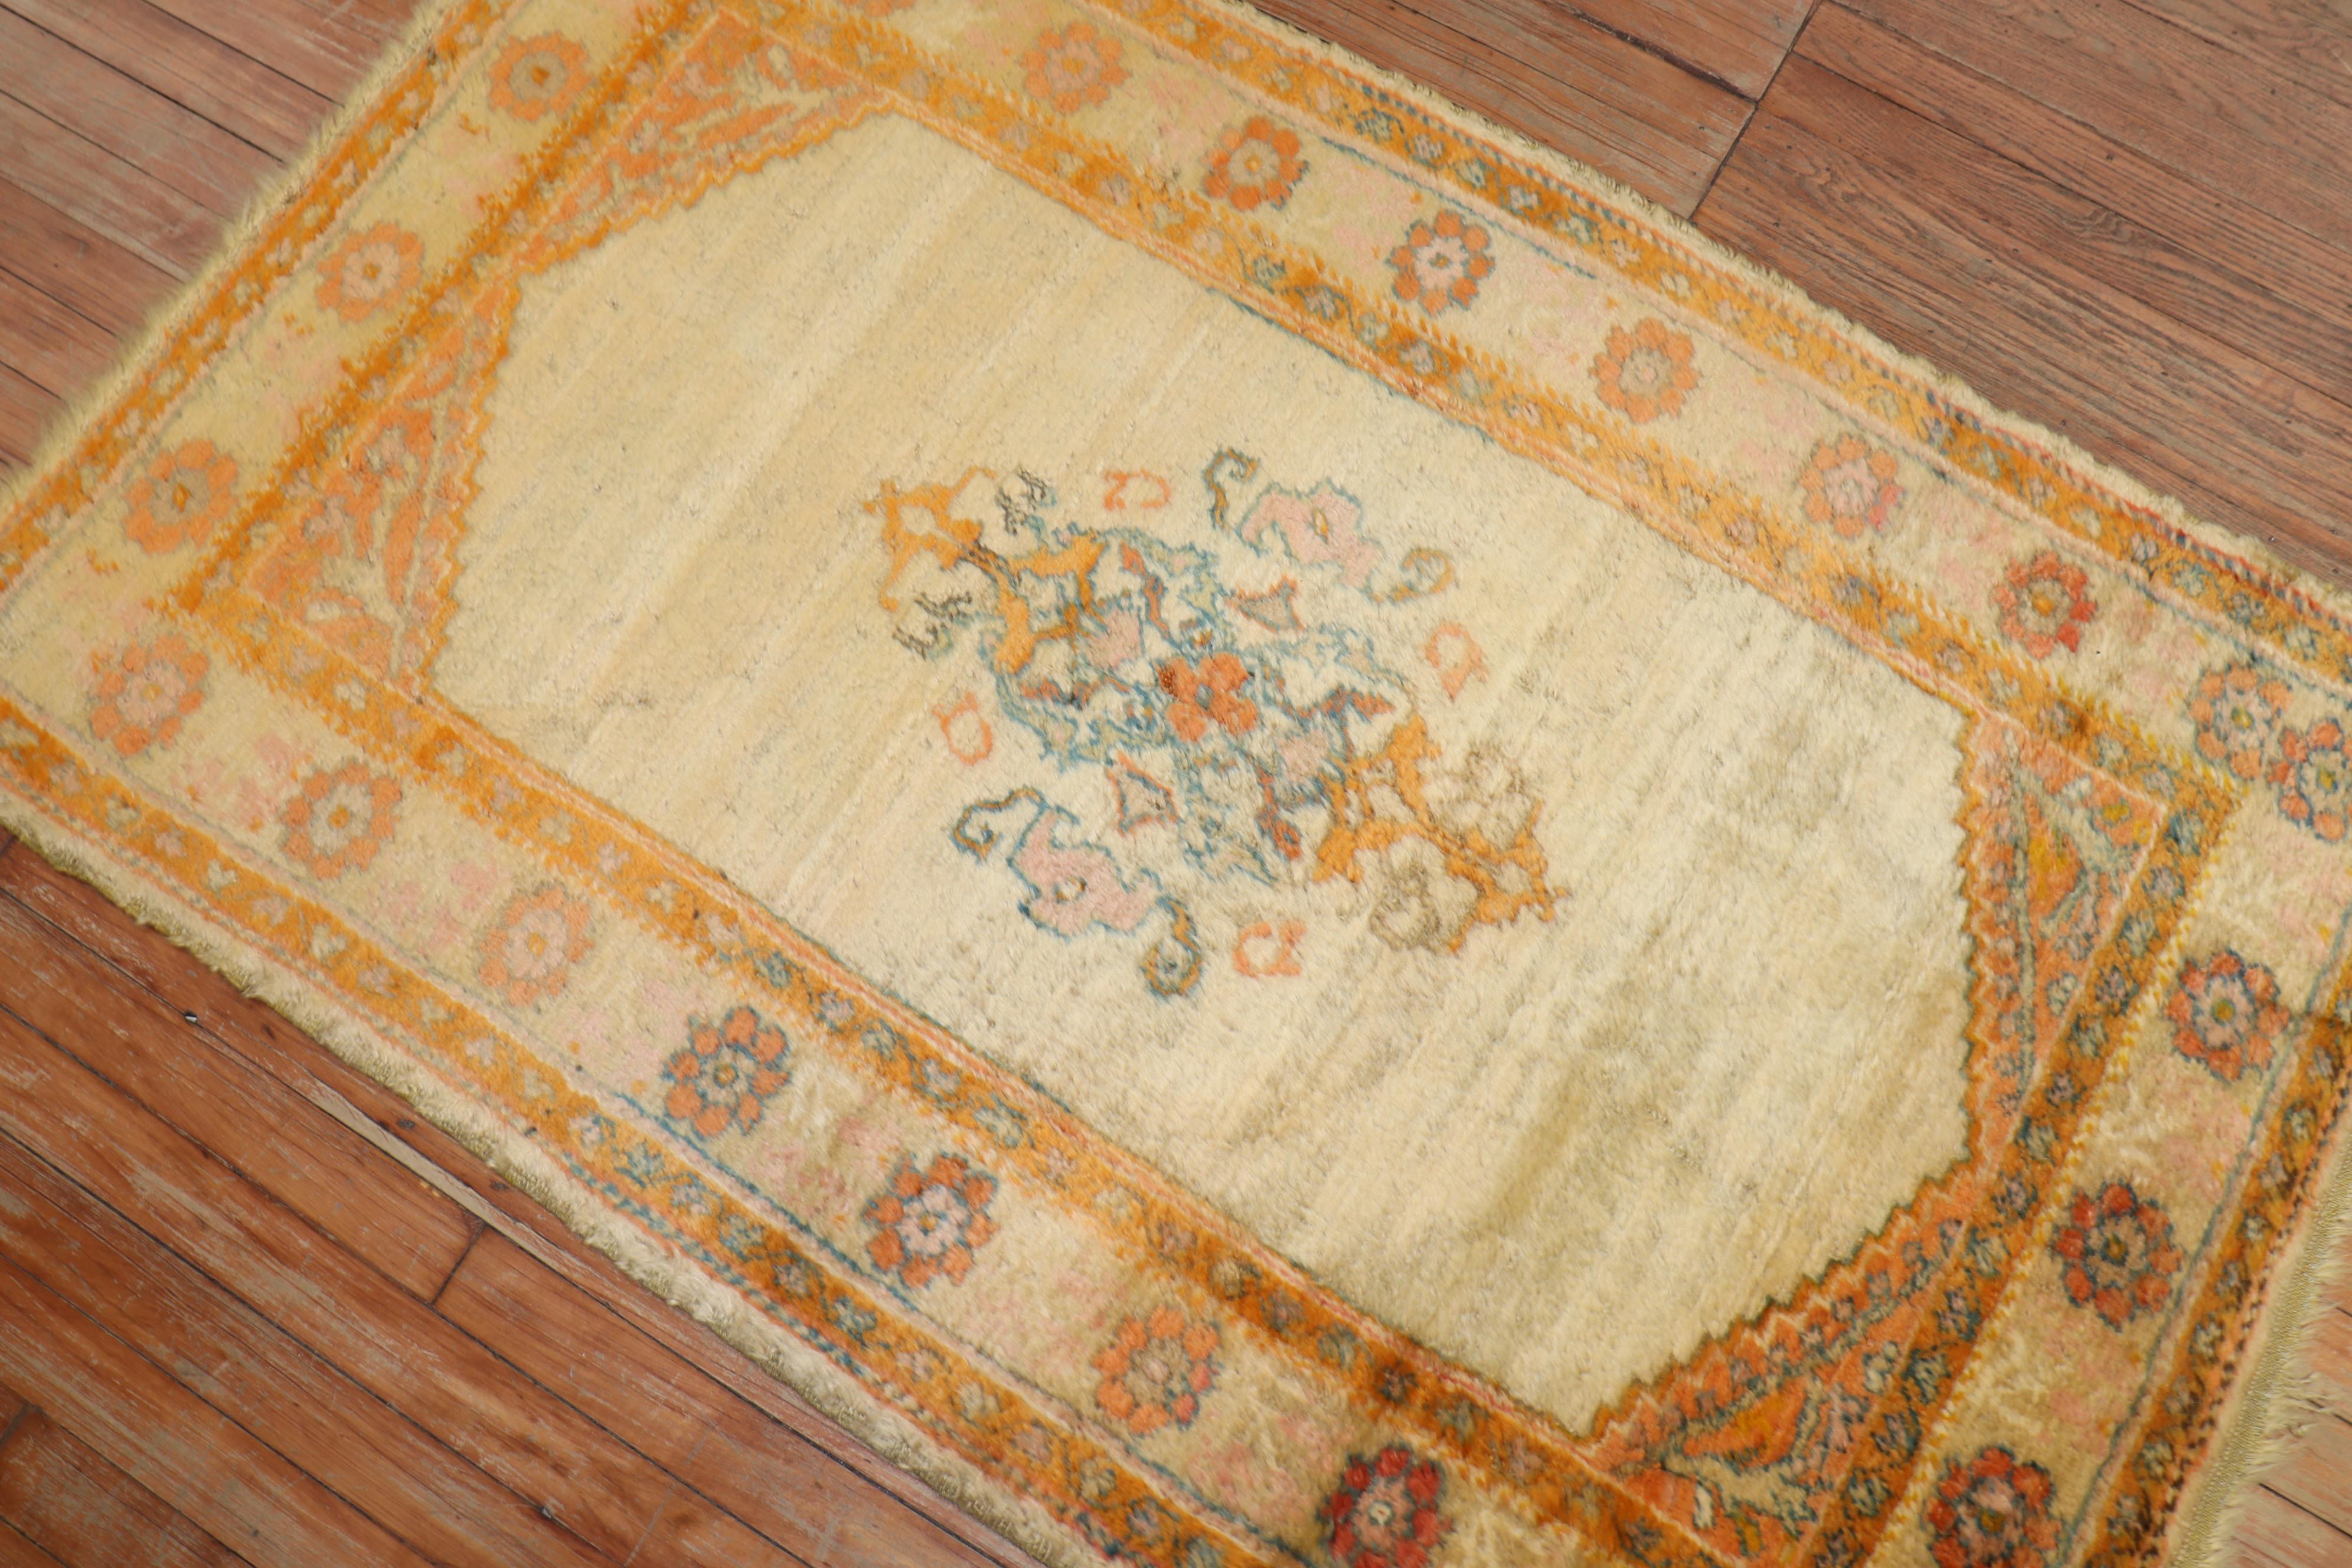 Early 20th century authentic ivory field Angora Oushak rug 

Measures: 3'2'' x 5'

Oushak rugs are prized for their rich looks as well as for their high quality and exceptional beauty, which makes them excellent decorative pieces. The ones made